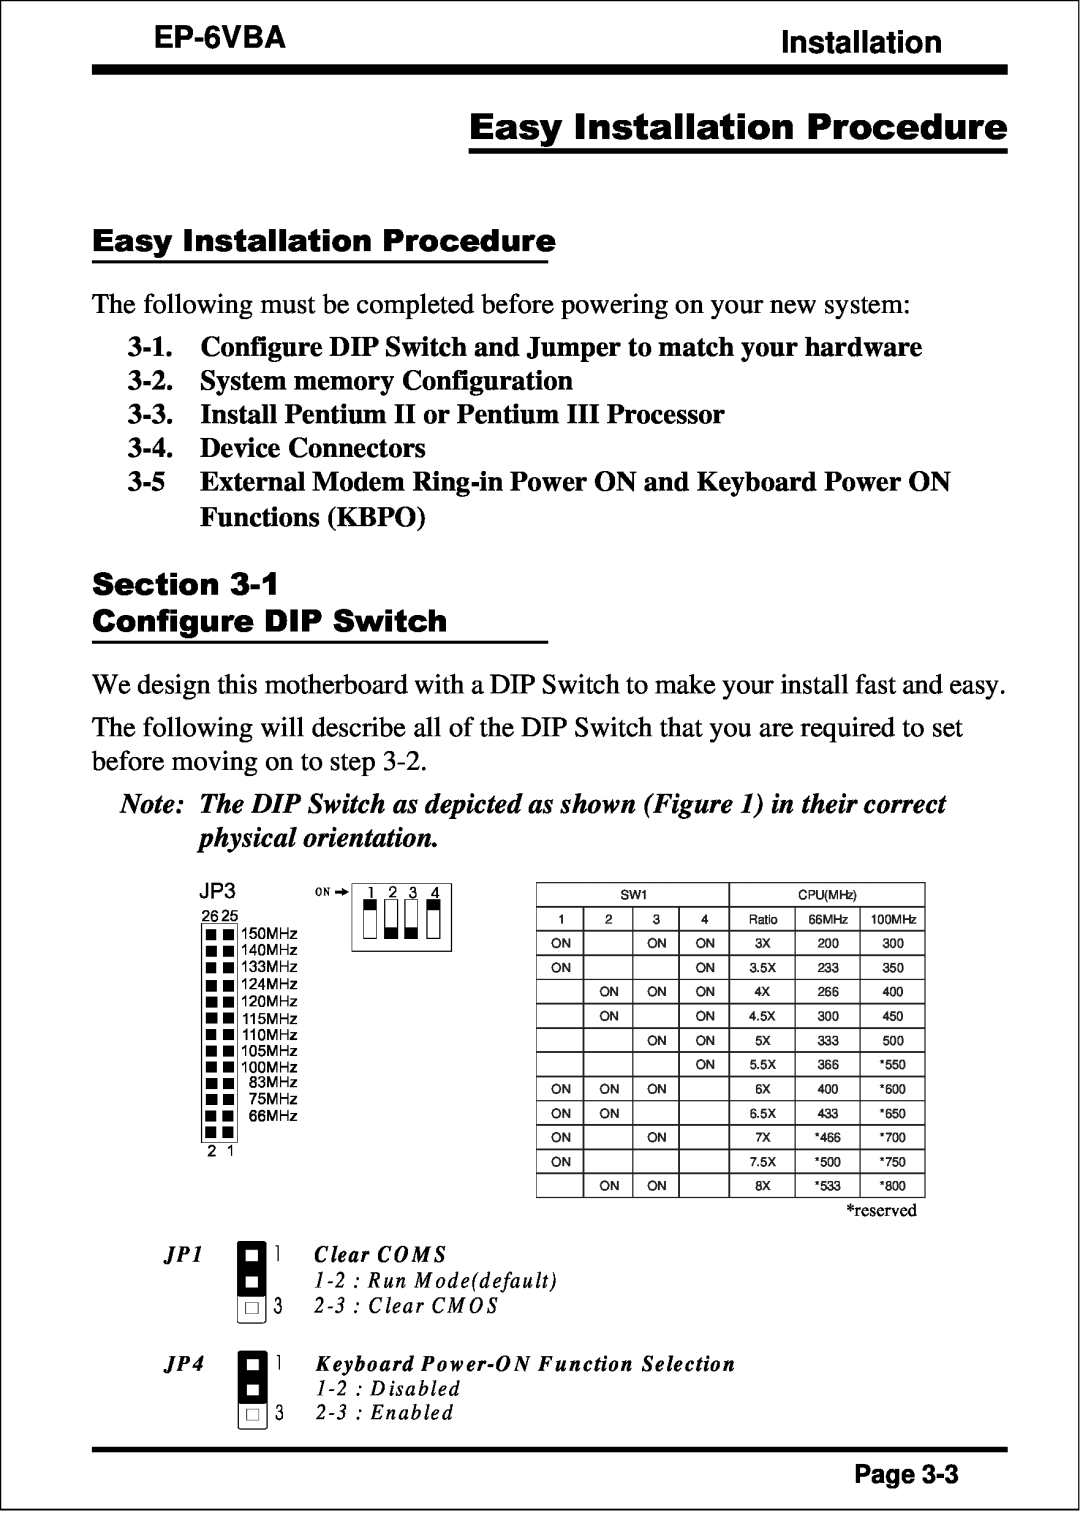 EPoX Computer EP-6VBA specifications Easy Installation Procedure, Section Configure DIP Switch, System memory Configuration 